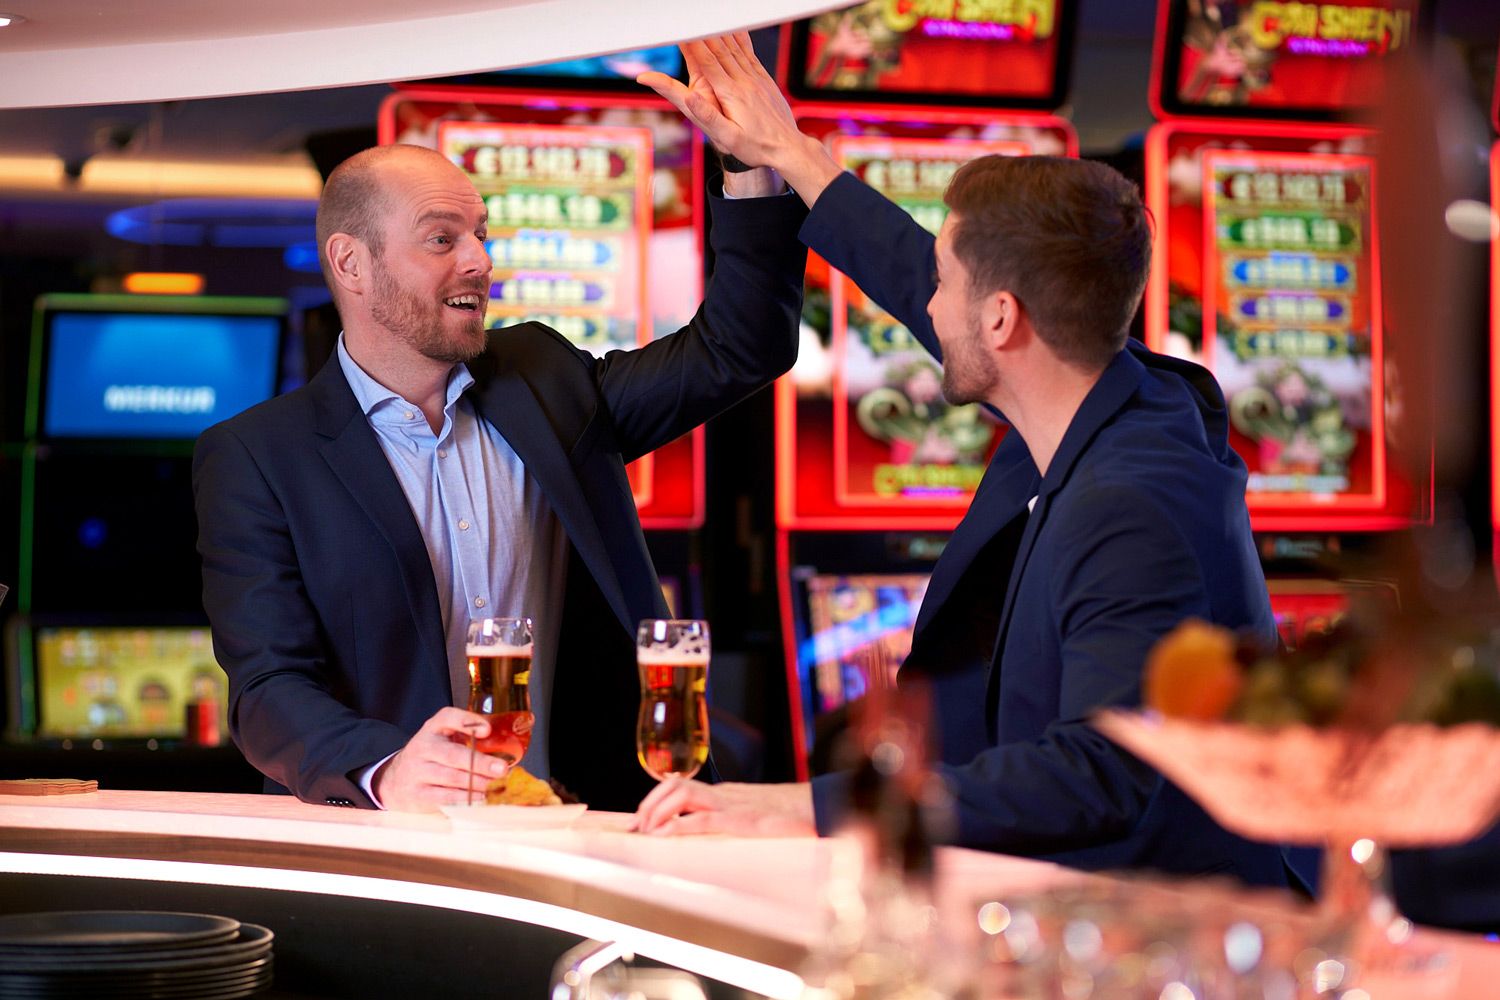 Two men shake hands over a beer at the bar.